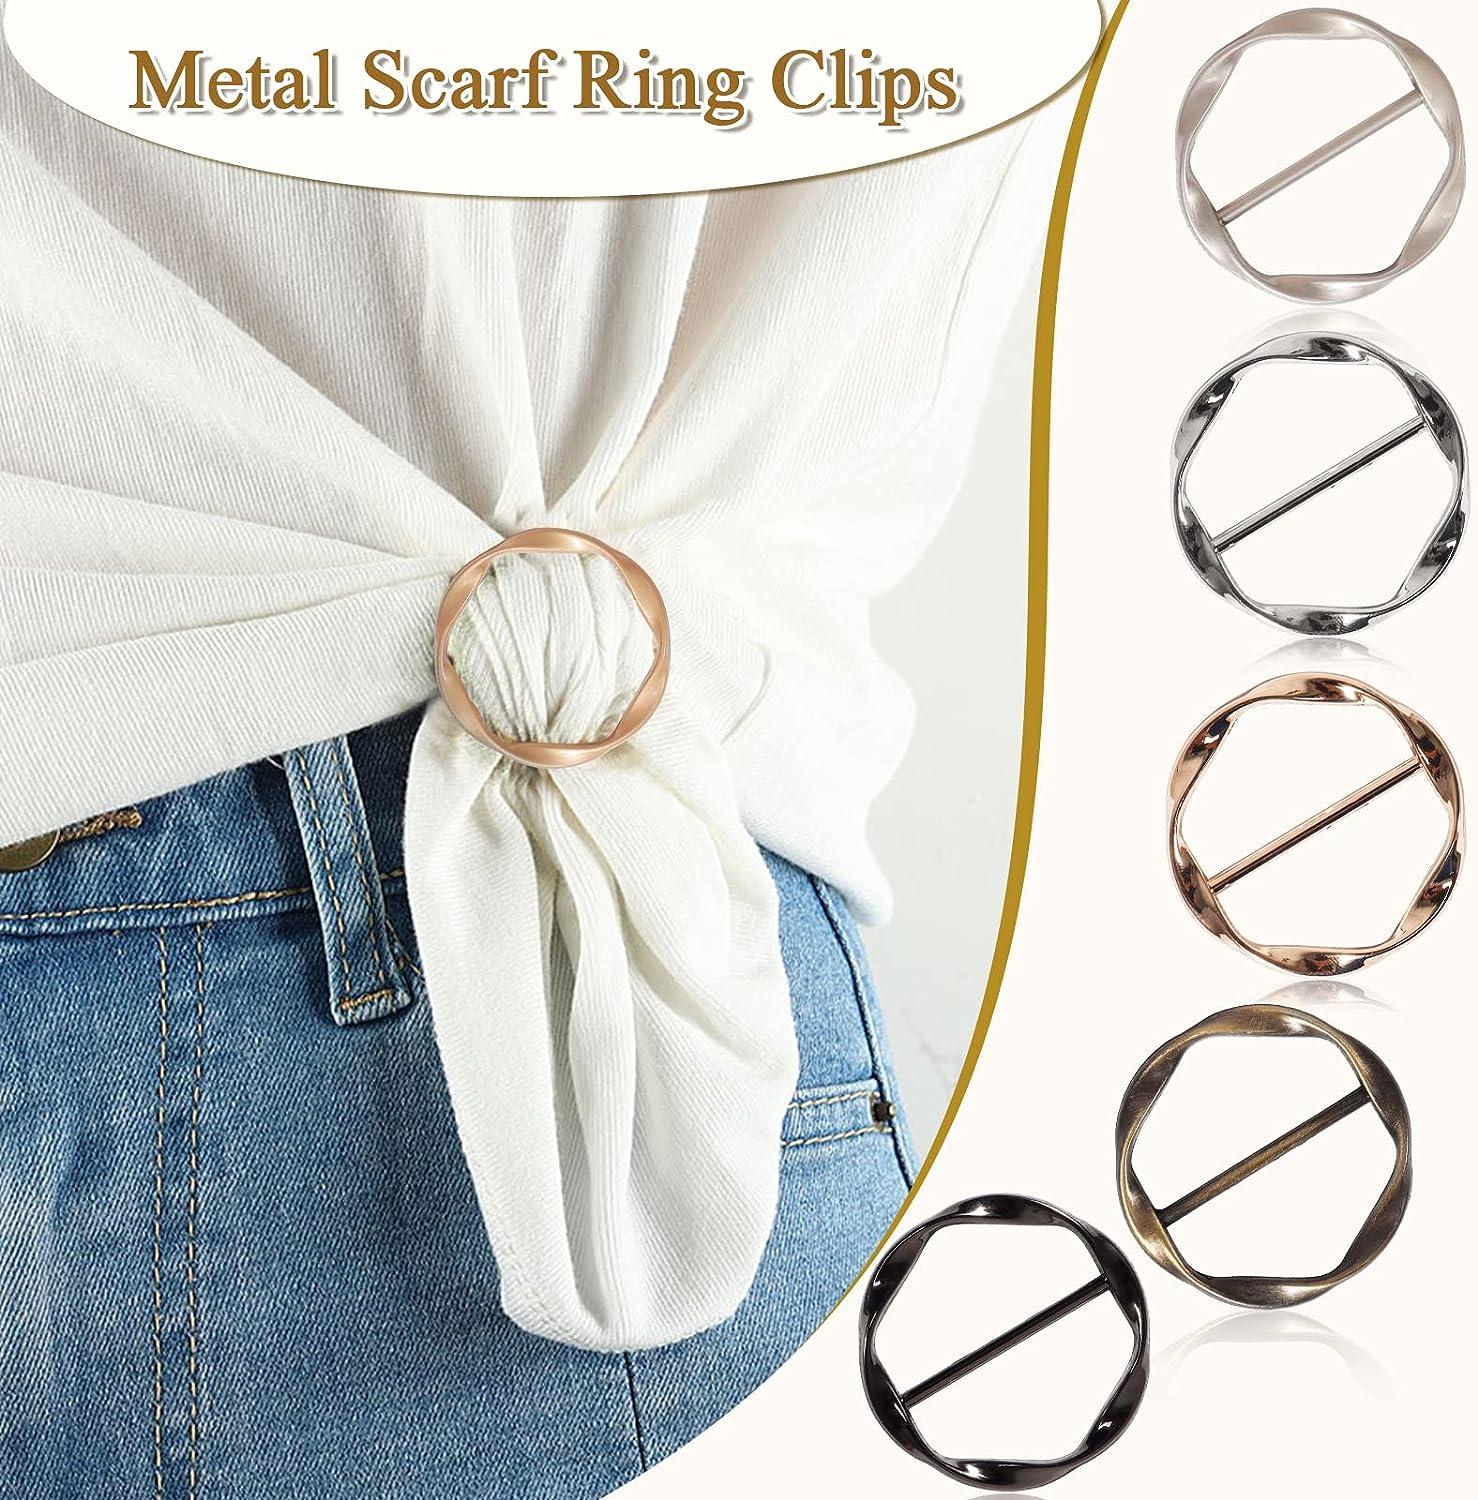 Alloy T-Shirt Clips Pearl scarf pins and clips 7 PCS ties rings scarf